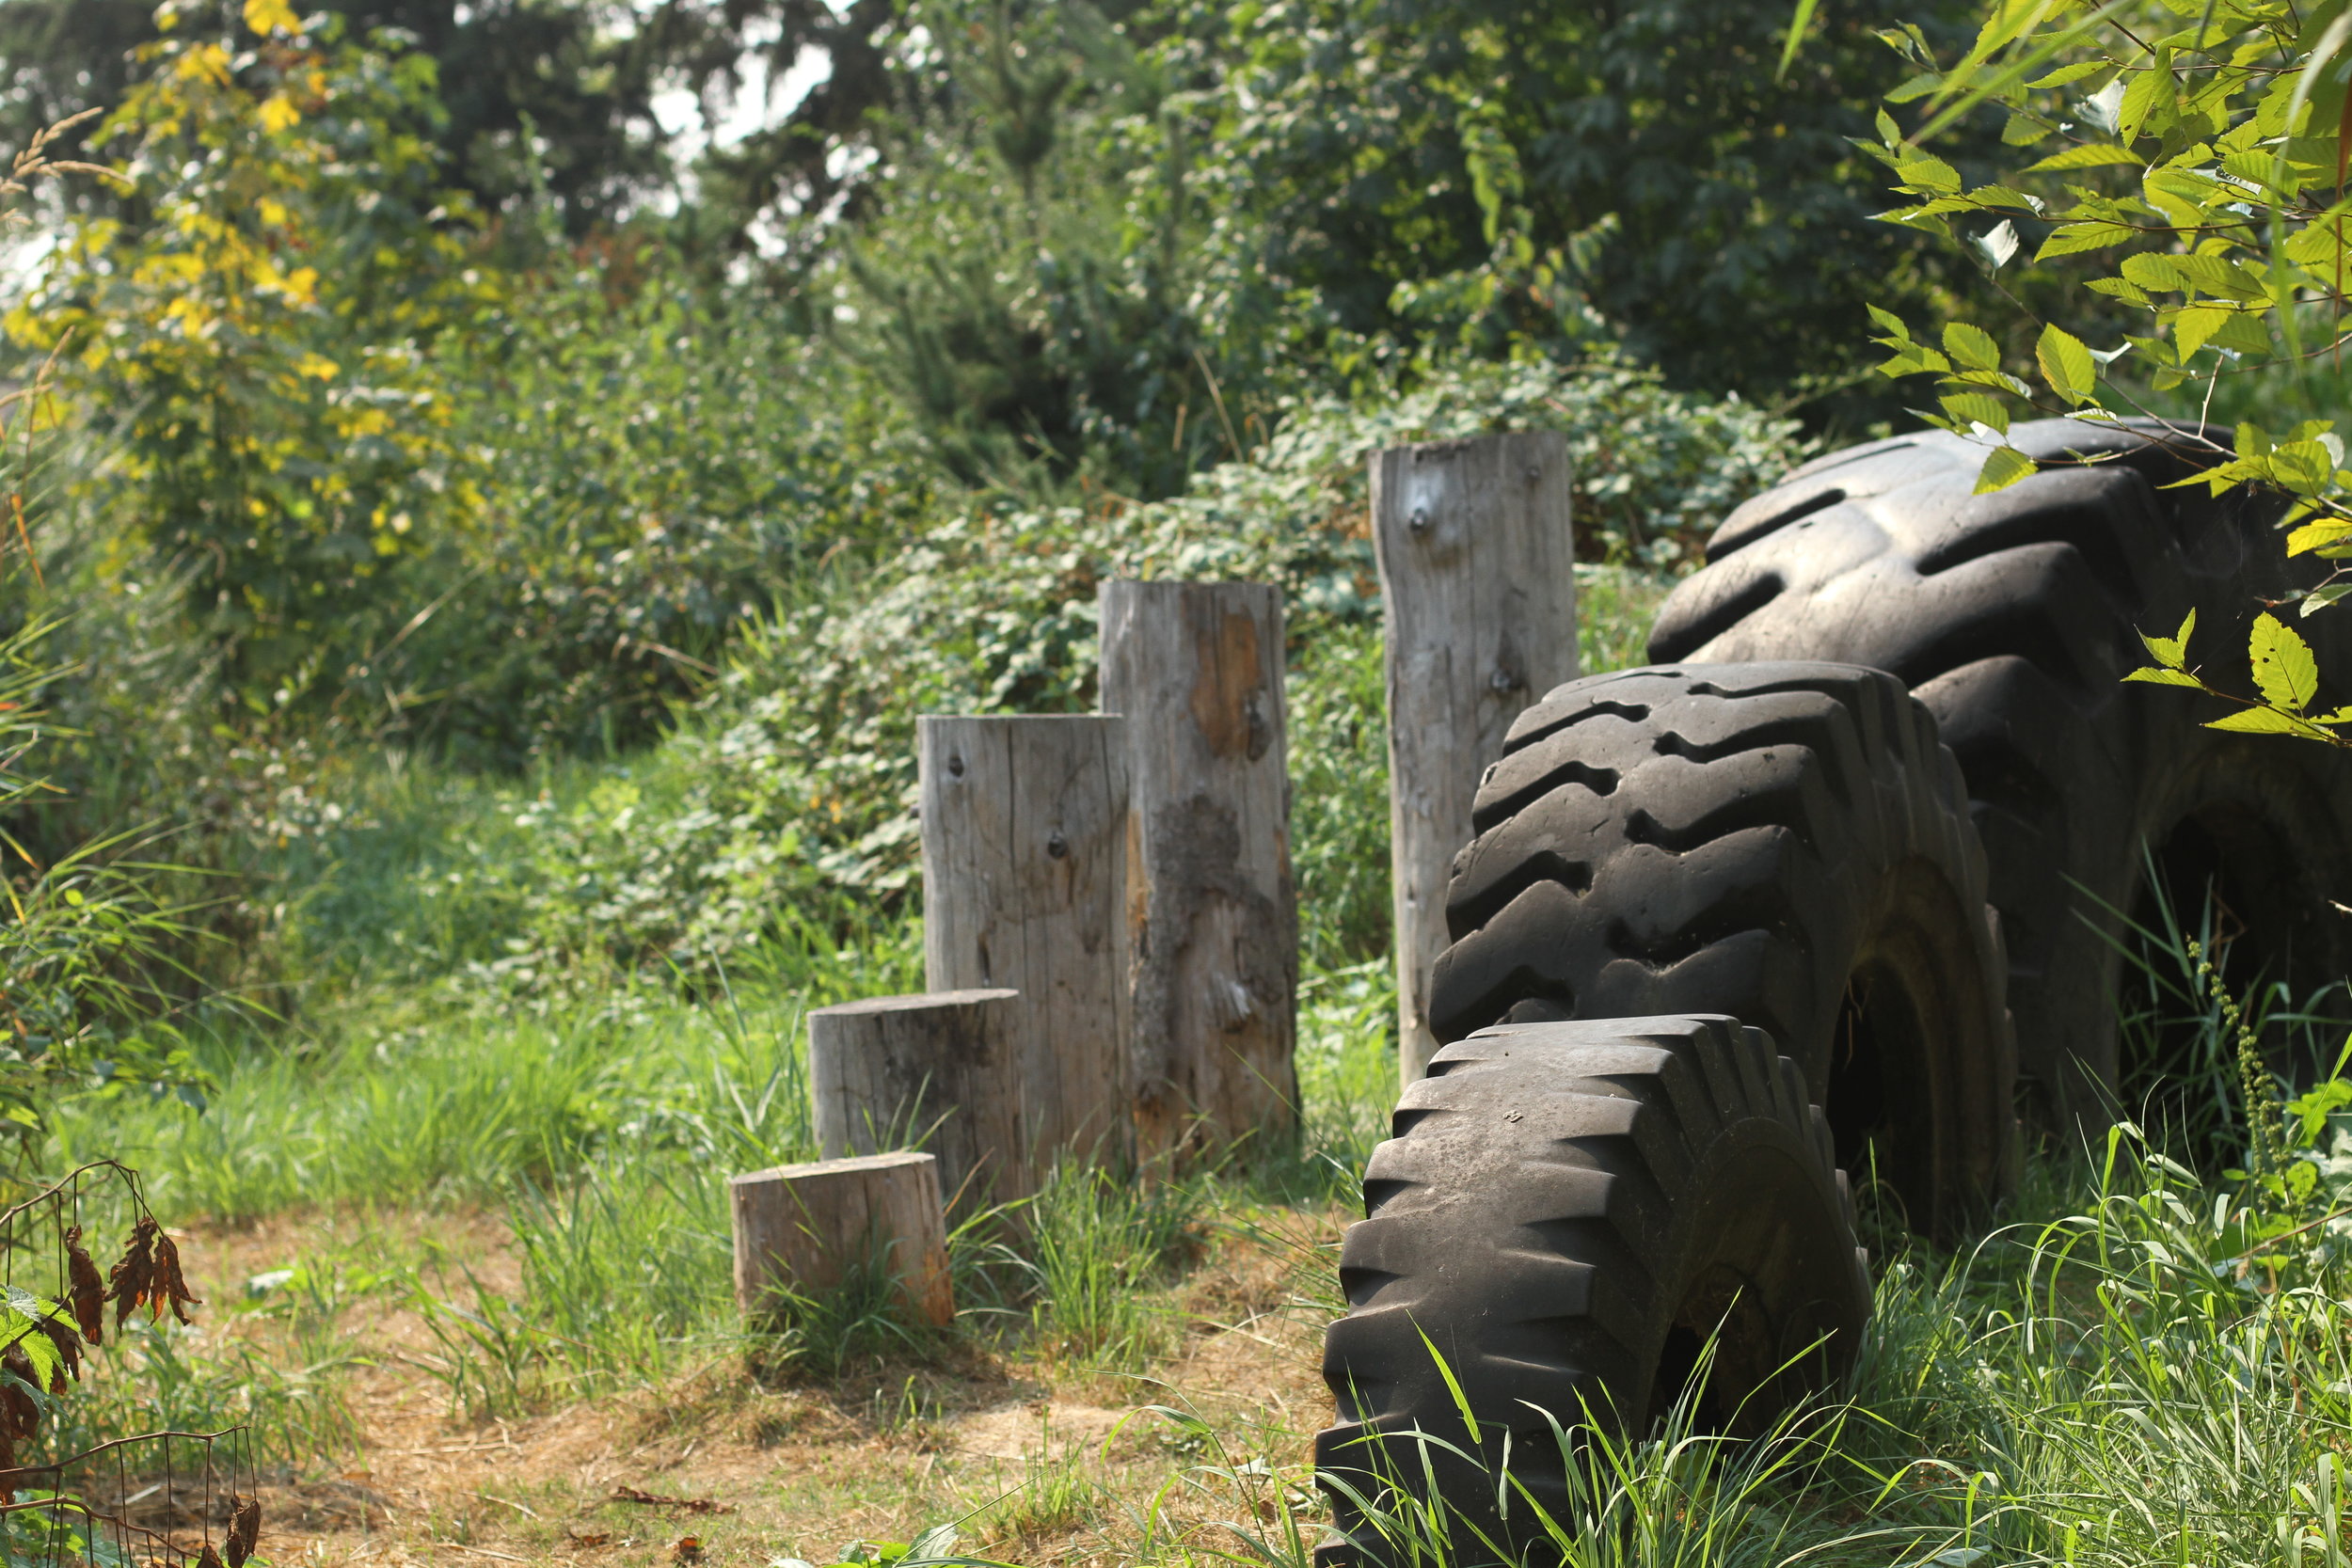 Five stumps and three very large tires embedded in the ground, surrounded by plants and trees.